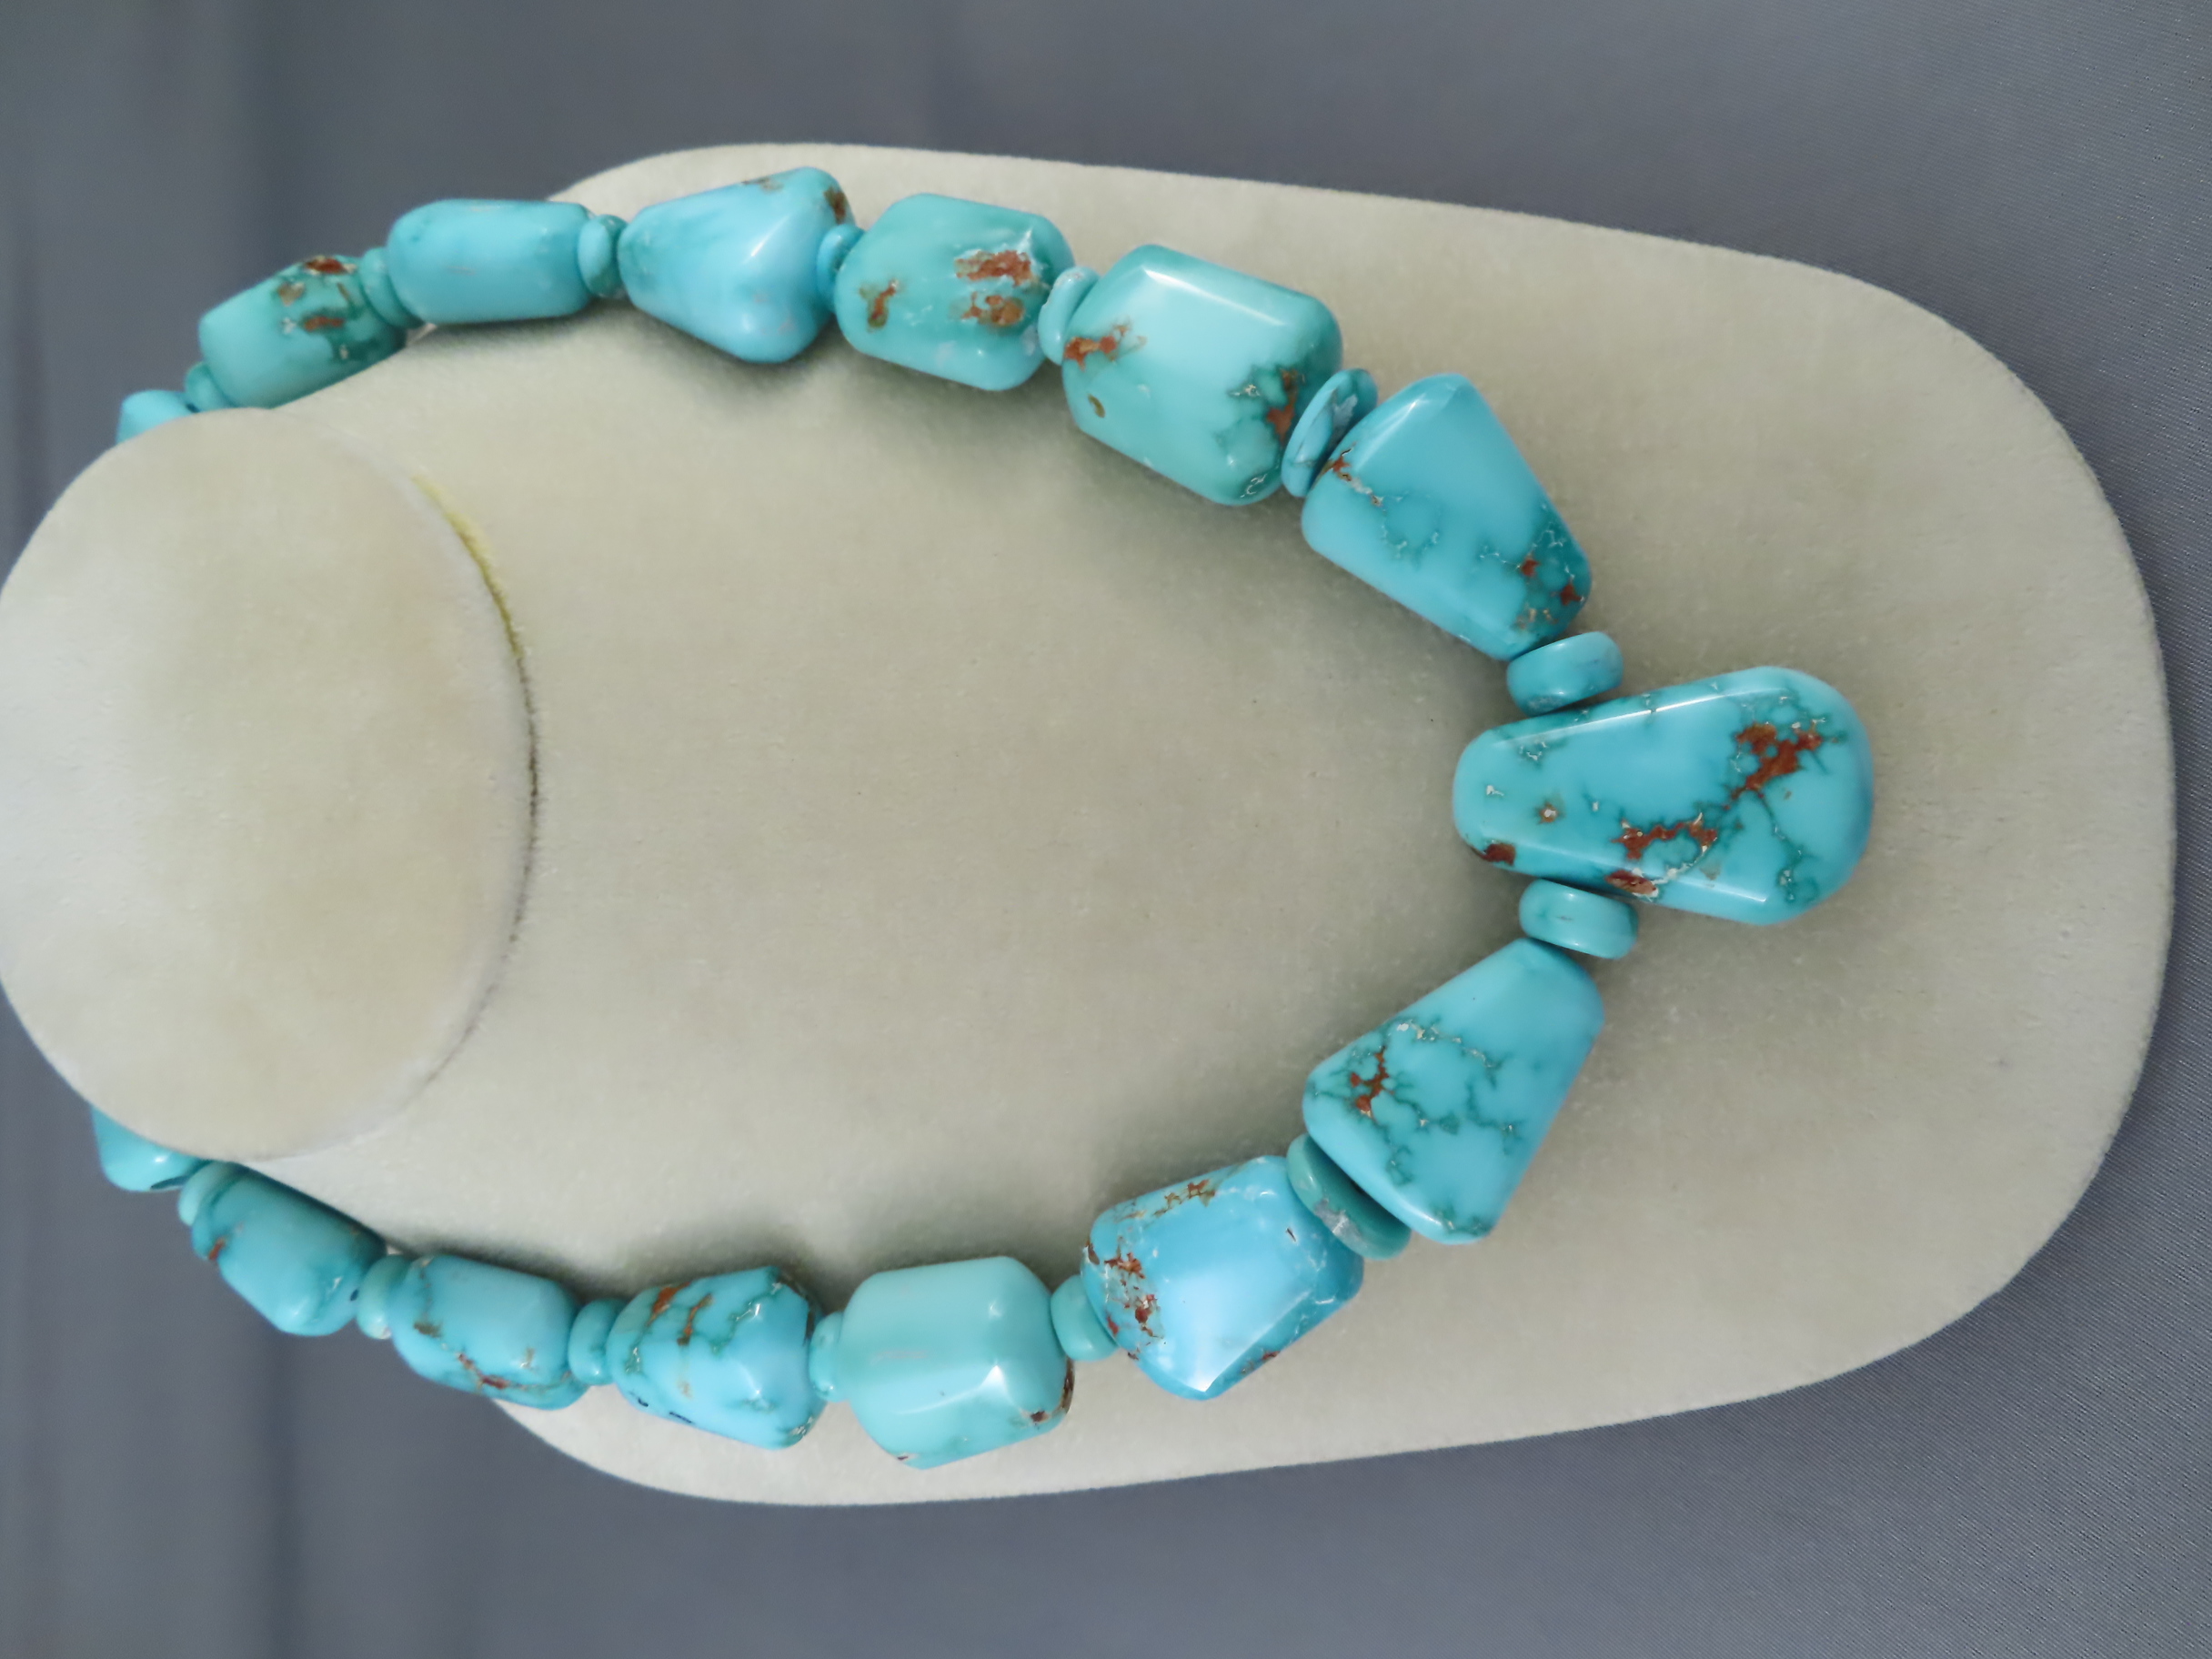 Buy Turquoise Jewelry - Impressive Fox Turquoise Necklace by jeweler, Bruce Eckhardt FOR SALE $3,450-